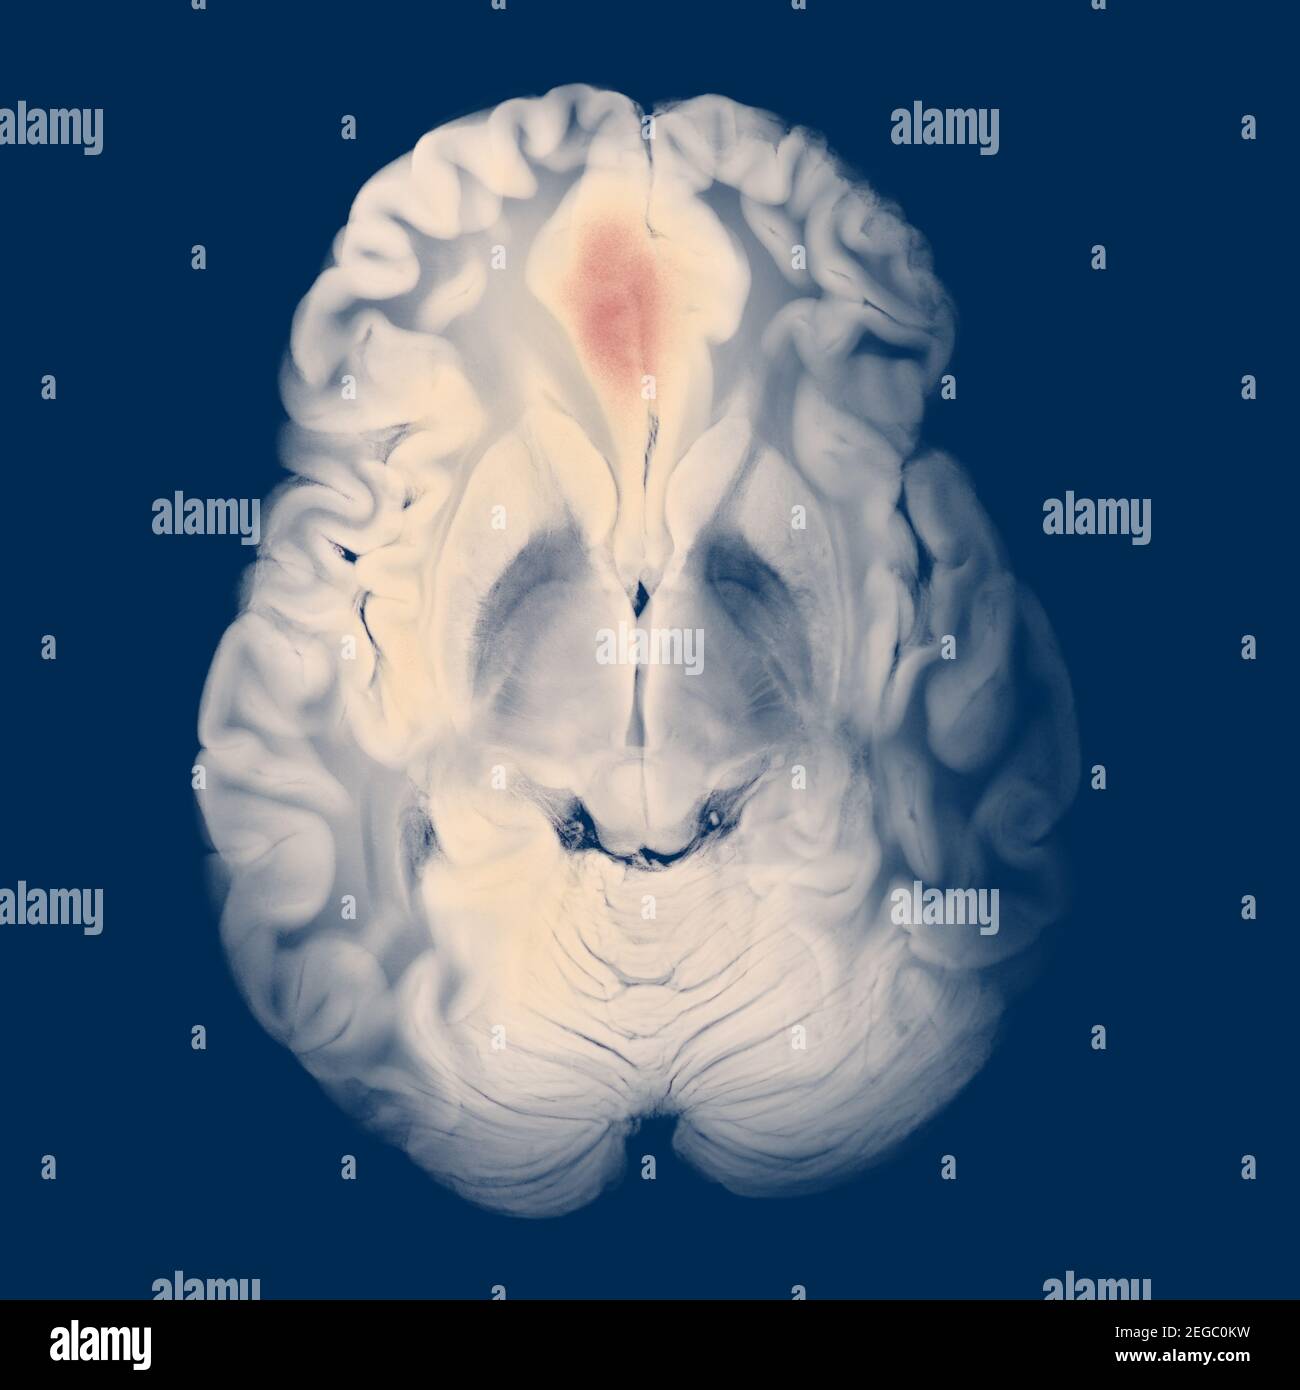 Axial Section Of The Brain With A Swollen Right Frontal Lobe Hematoma Stock Photo